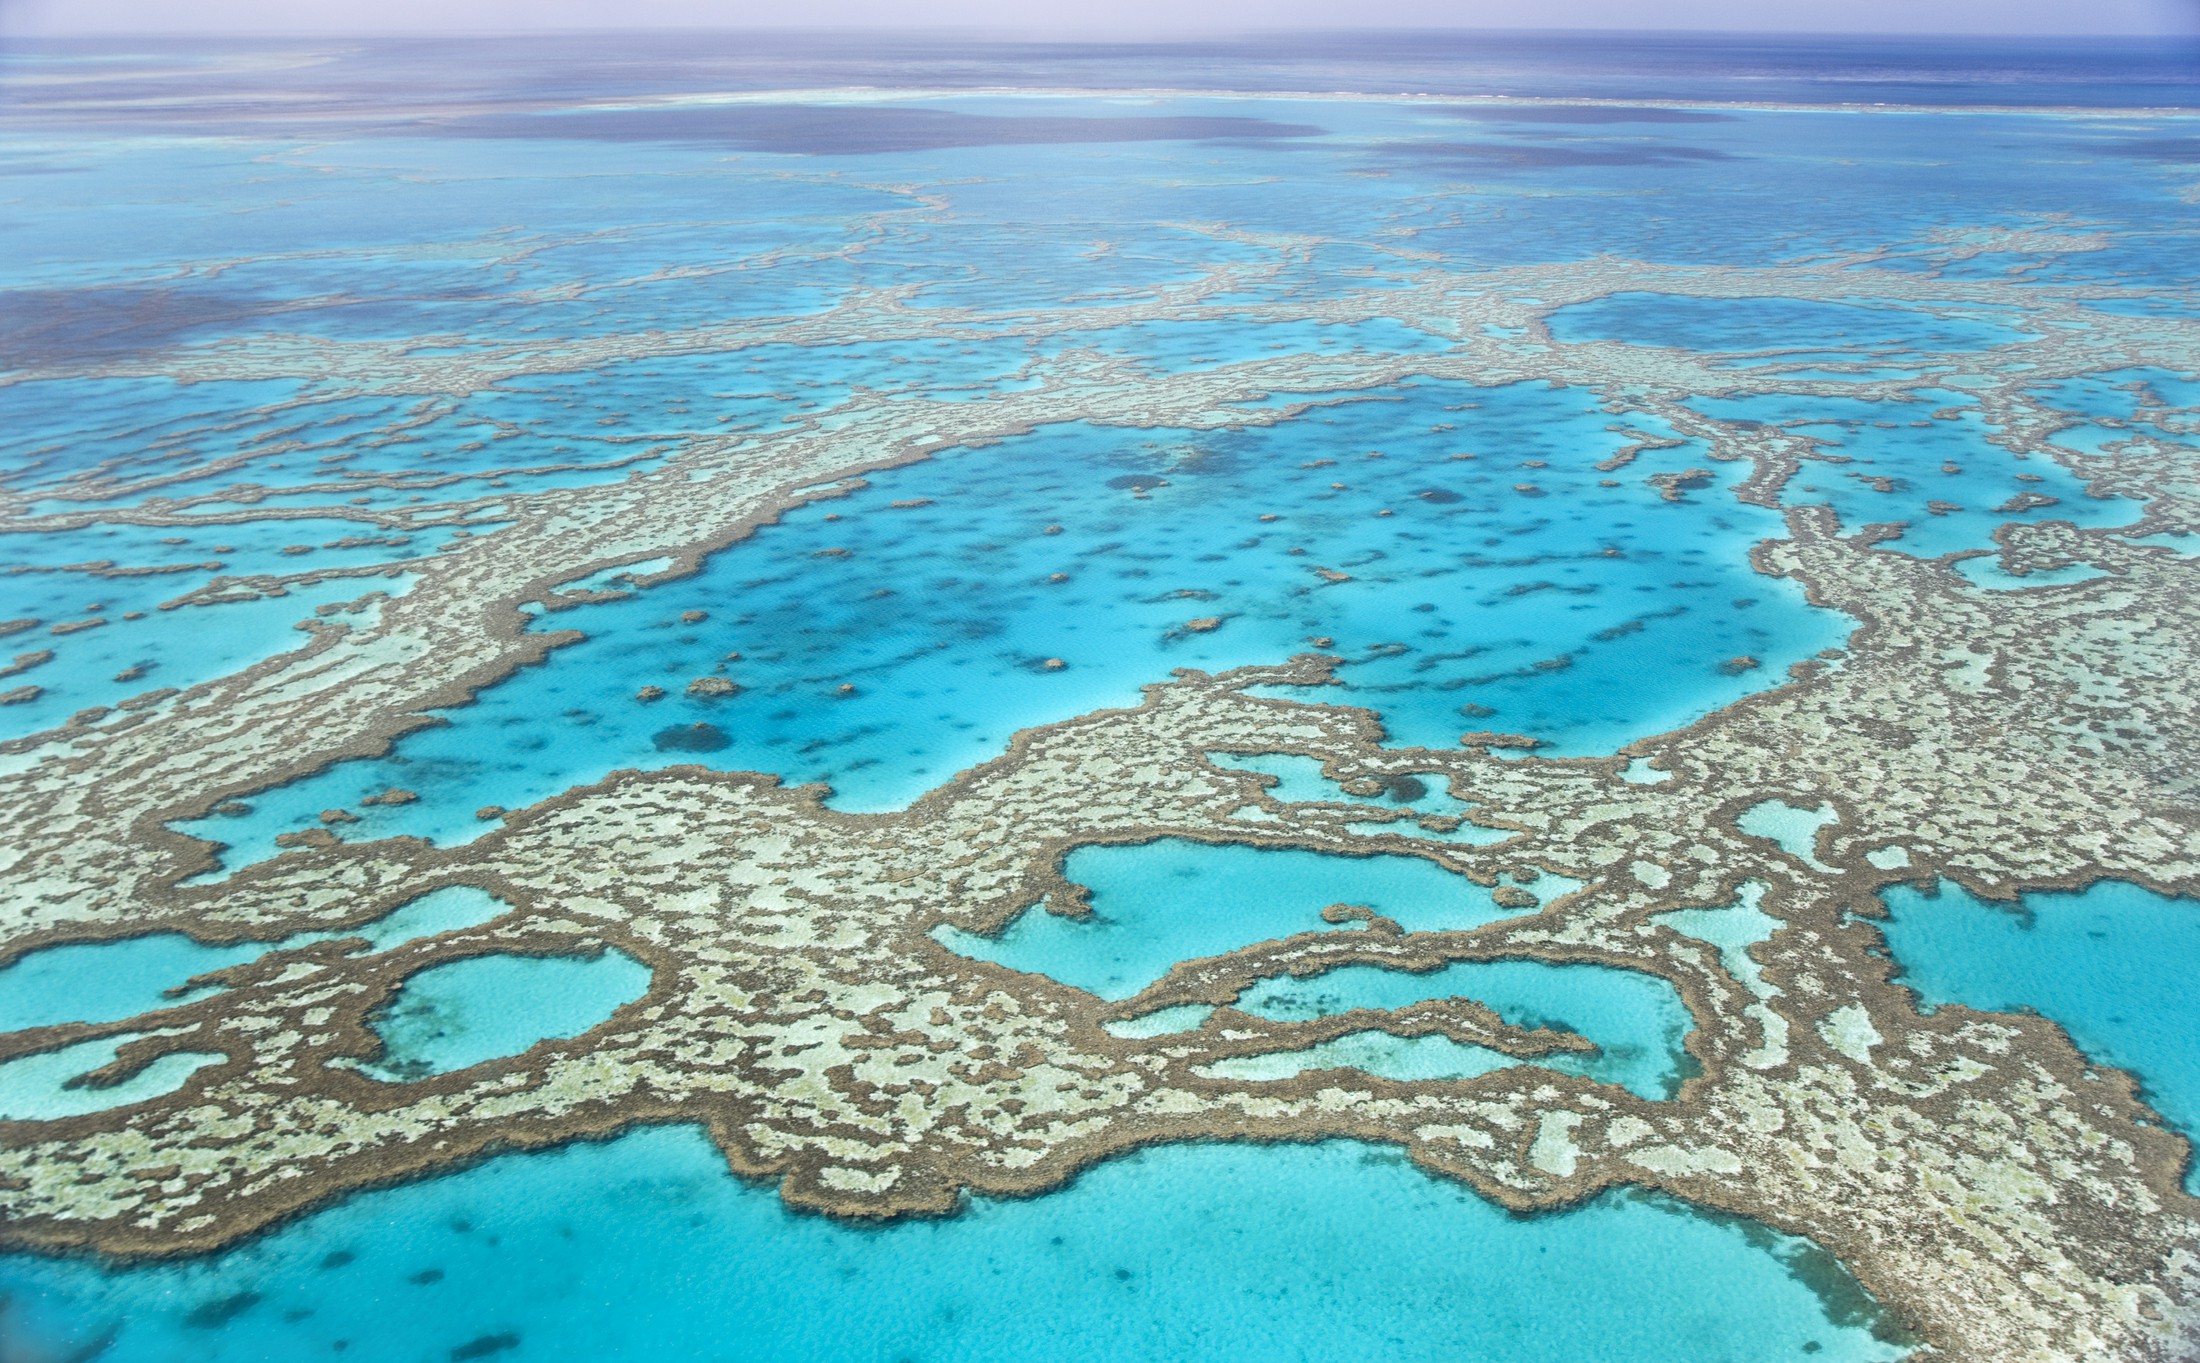 Aerial view of The Great Barrier Reef